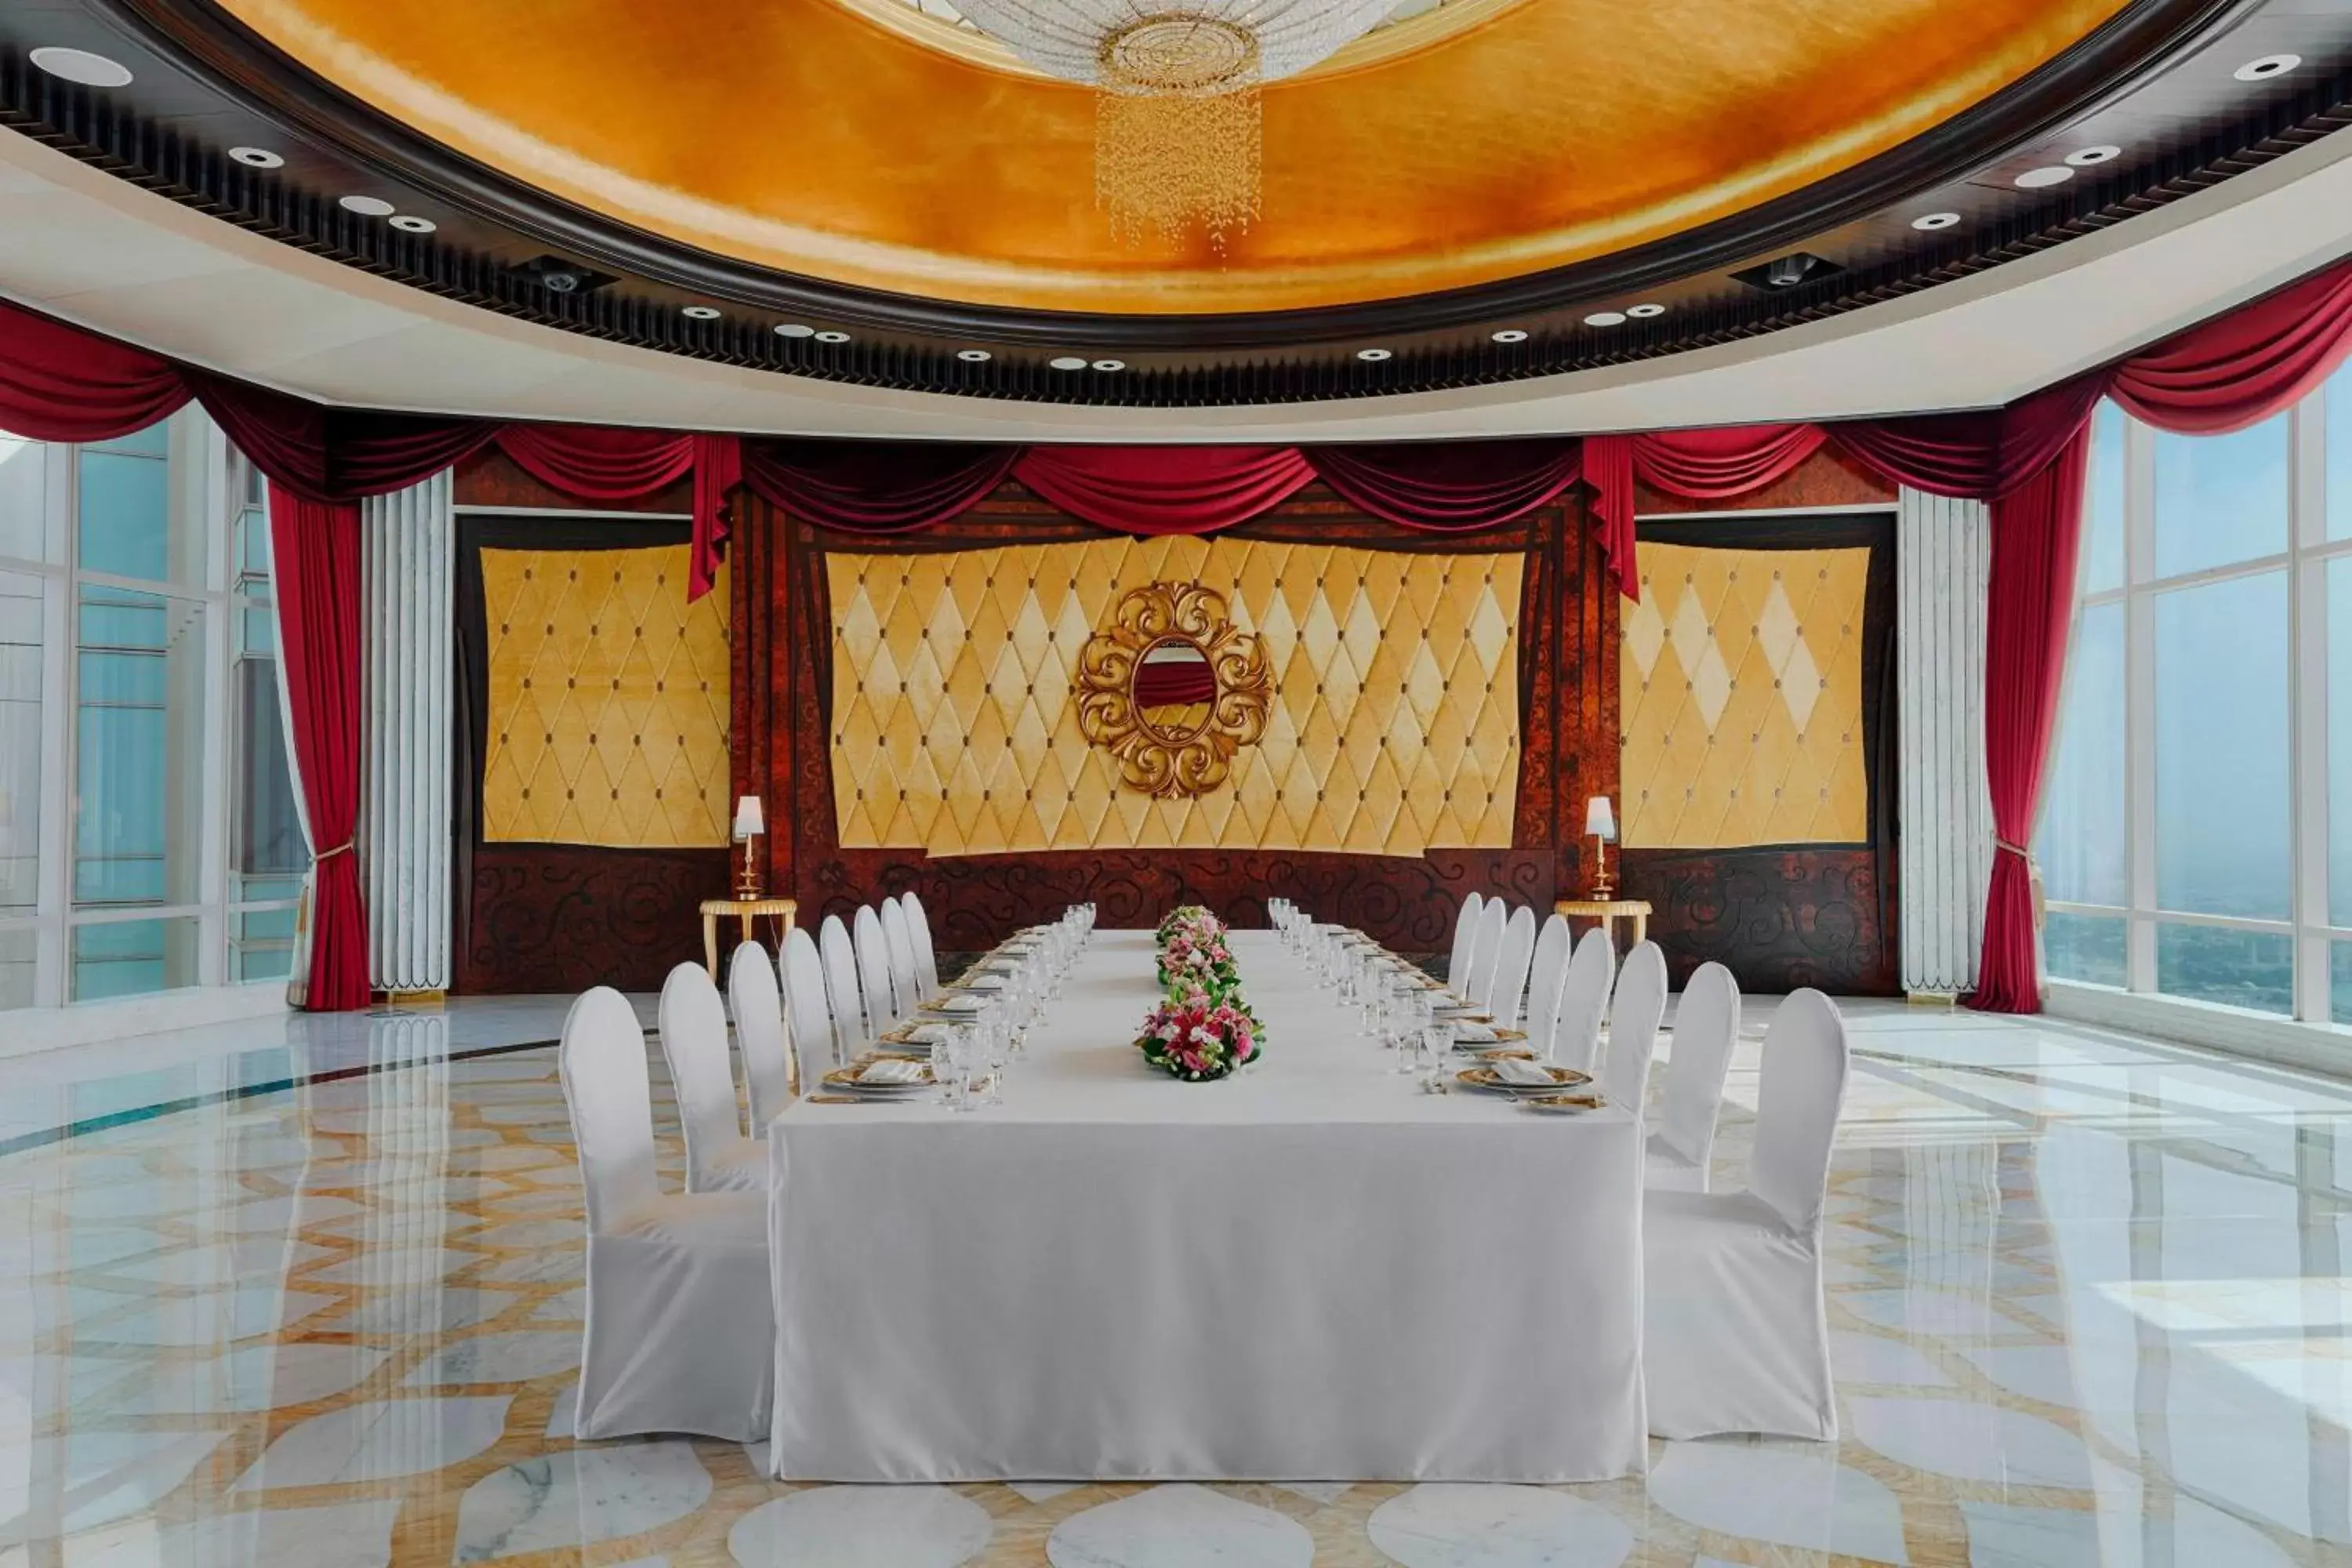 Meeting/conference room, Banquet Facilities in The St. Regis Abu Dhabi